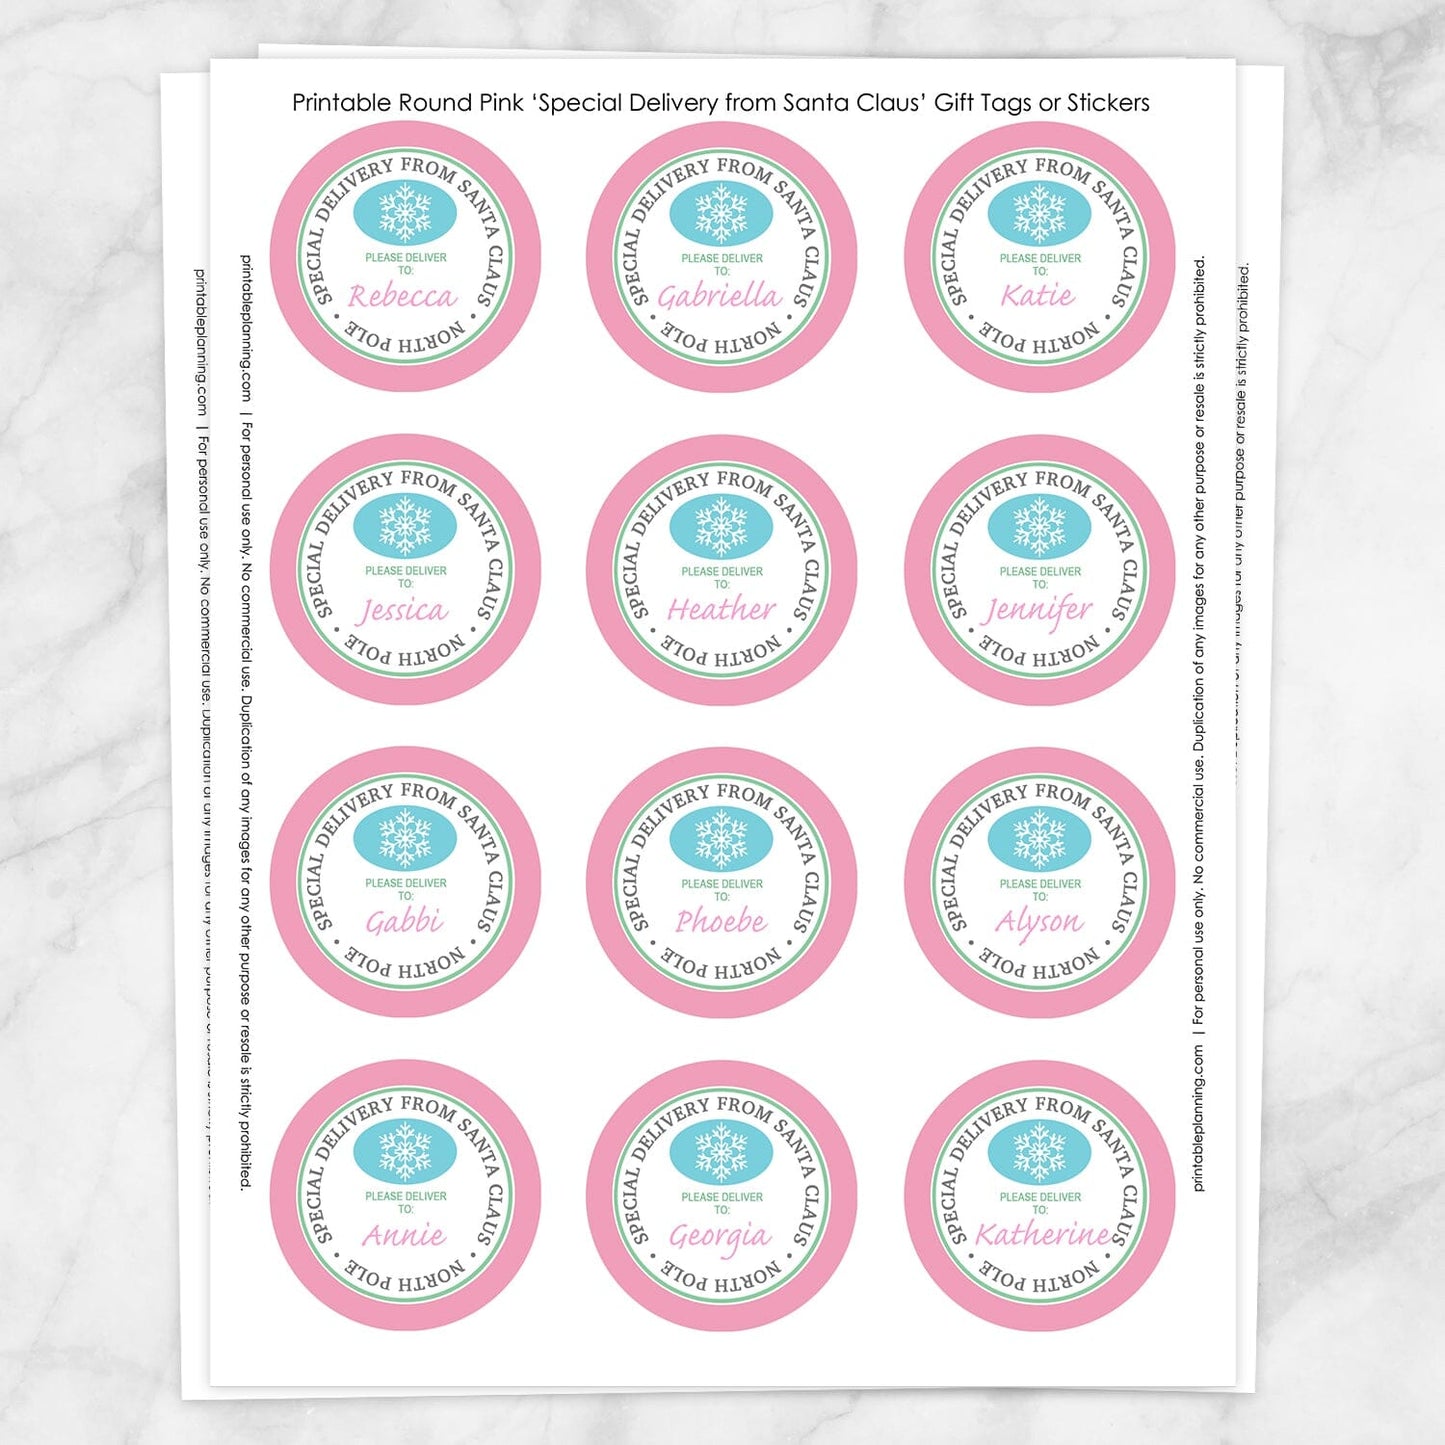 Printable Special Delivery from Santa Claus - Pink Round Personalized Gift Tags or Stickers at Printable Planning. Sheet of 12 stickers.